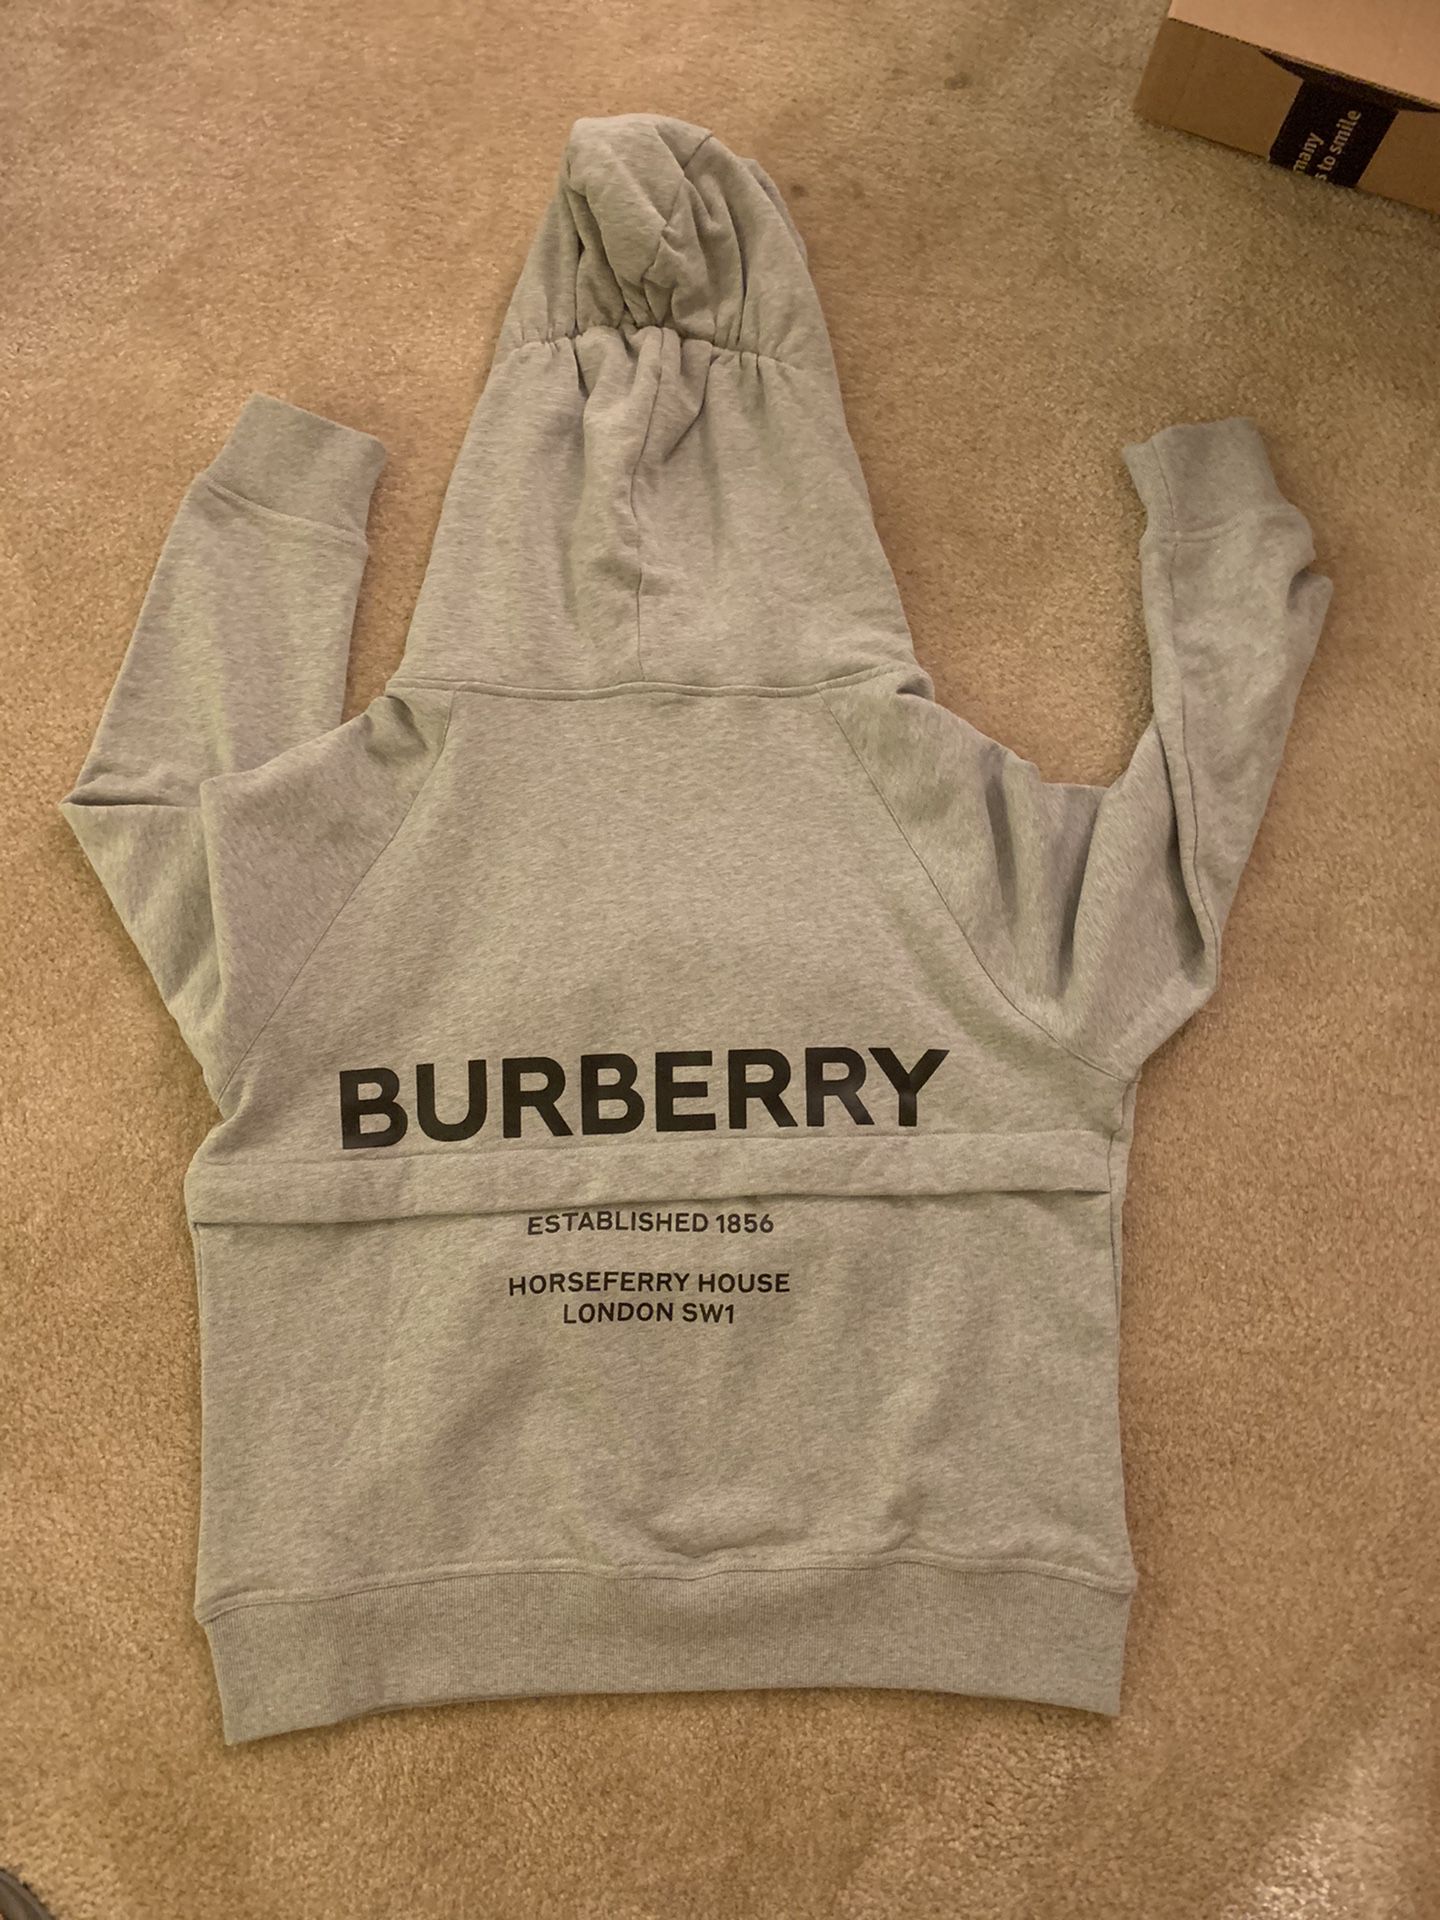 Burberry hoodie size L